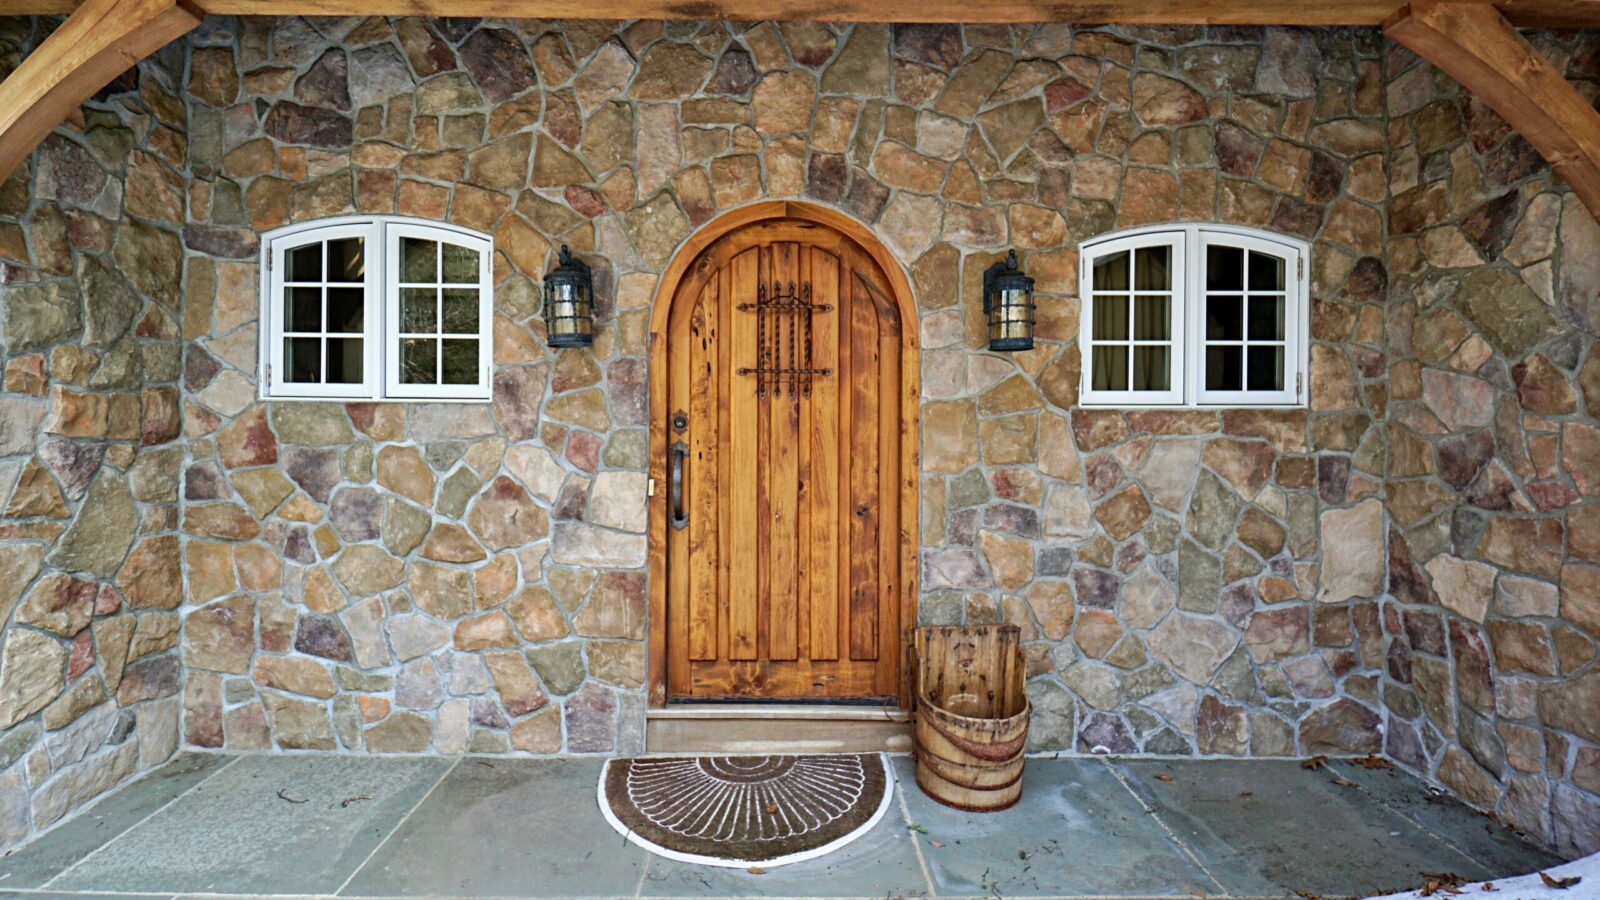 Florence, MA (5066) cottage door surrounded by stone and timber frame